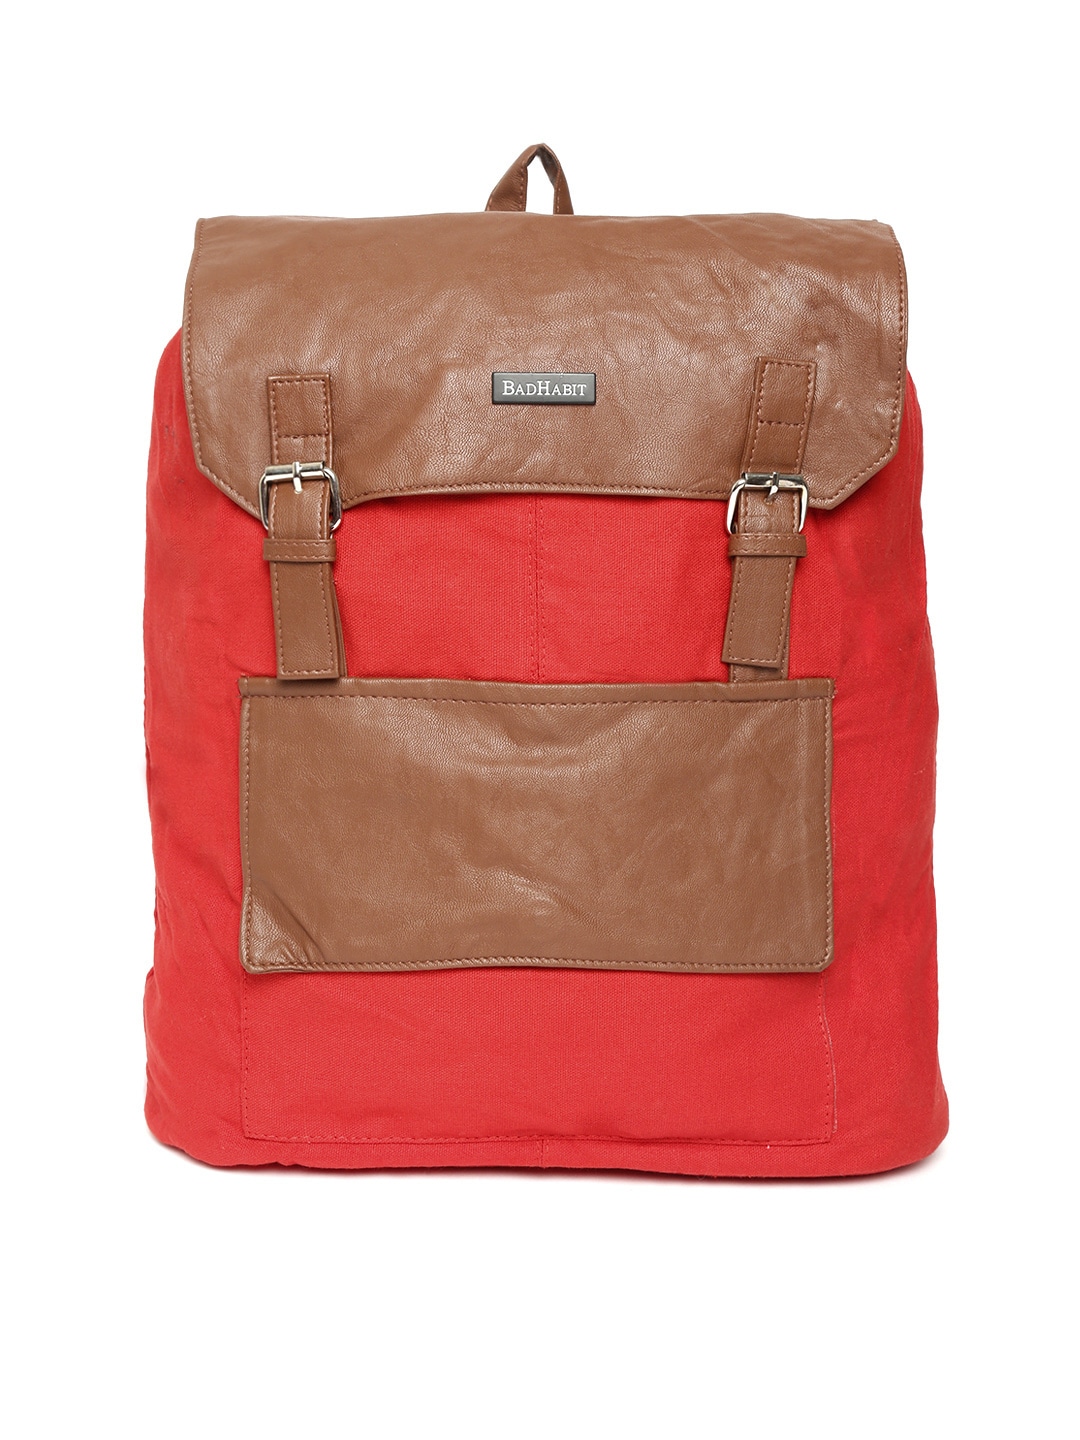 BAD HABIT Unisex Red & Brown Colourblocked Backpack Price in India